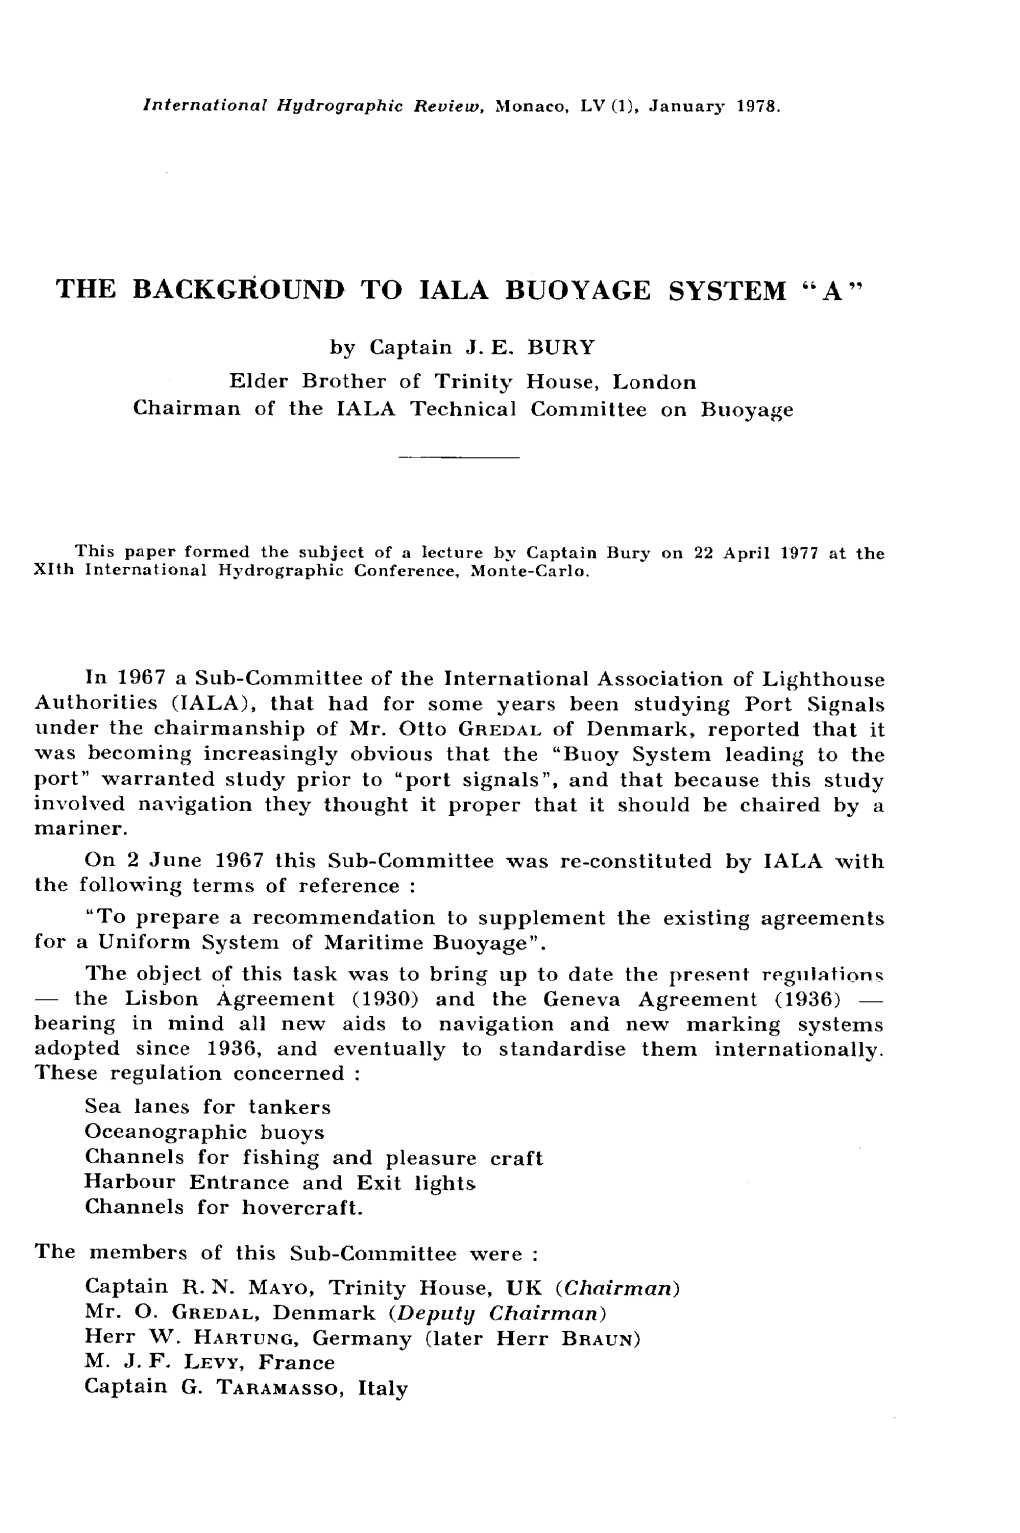 The Background to Iala Buoyage System “A ”